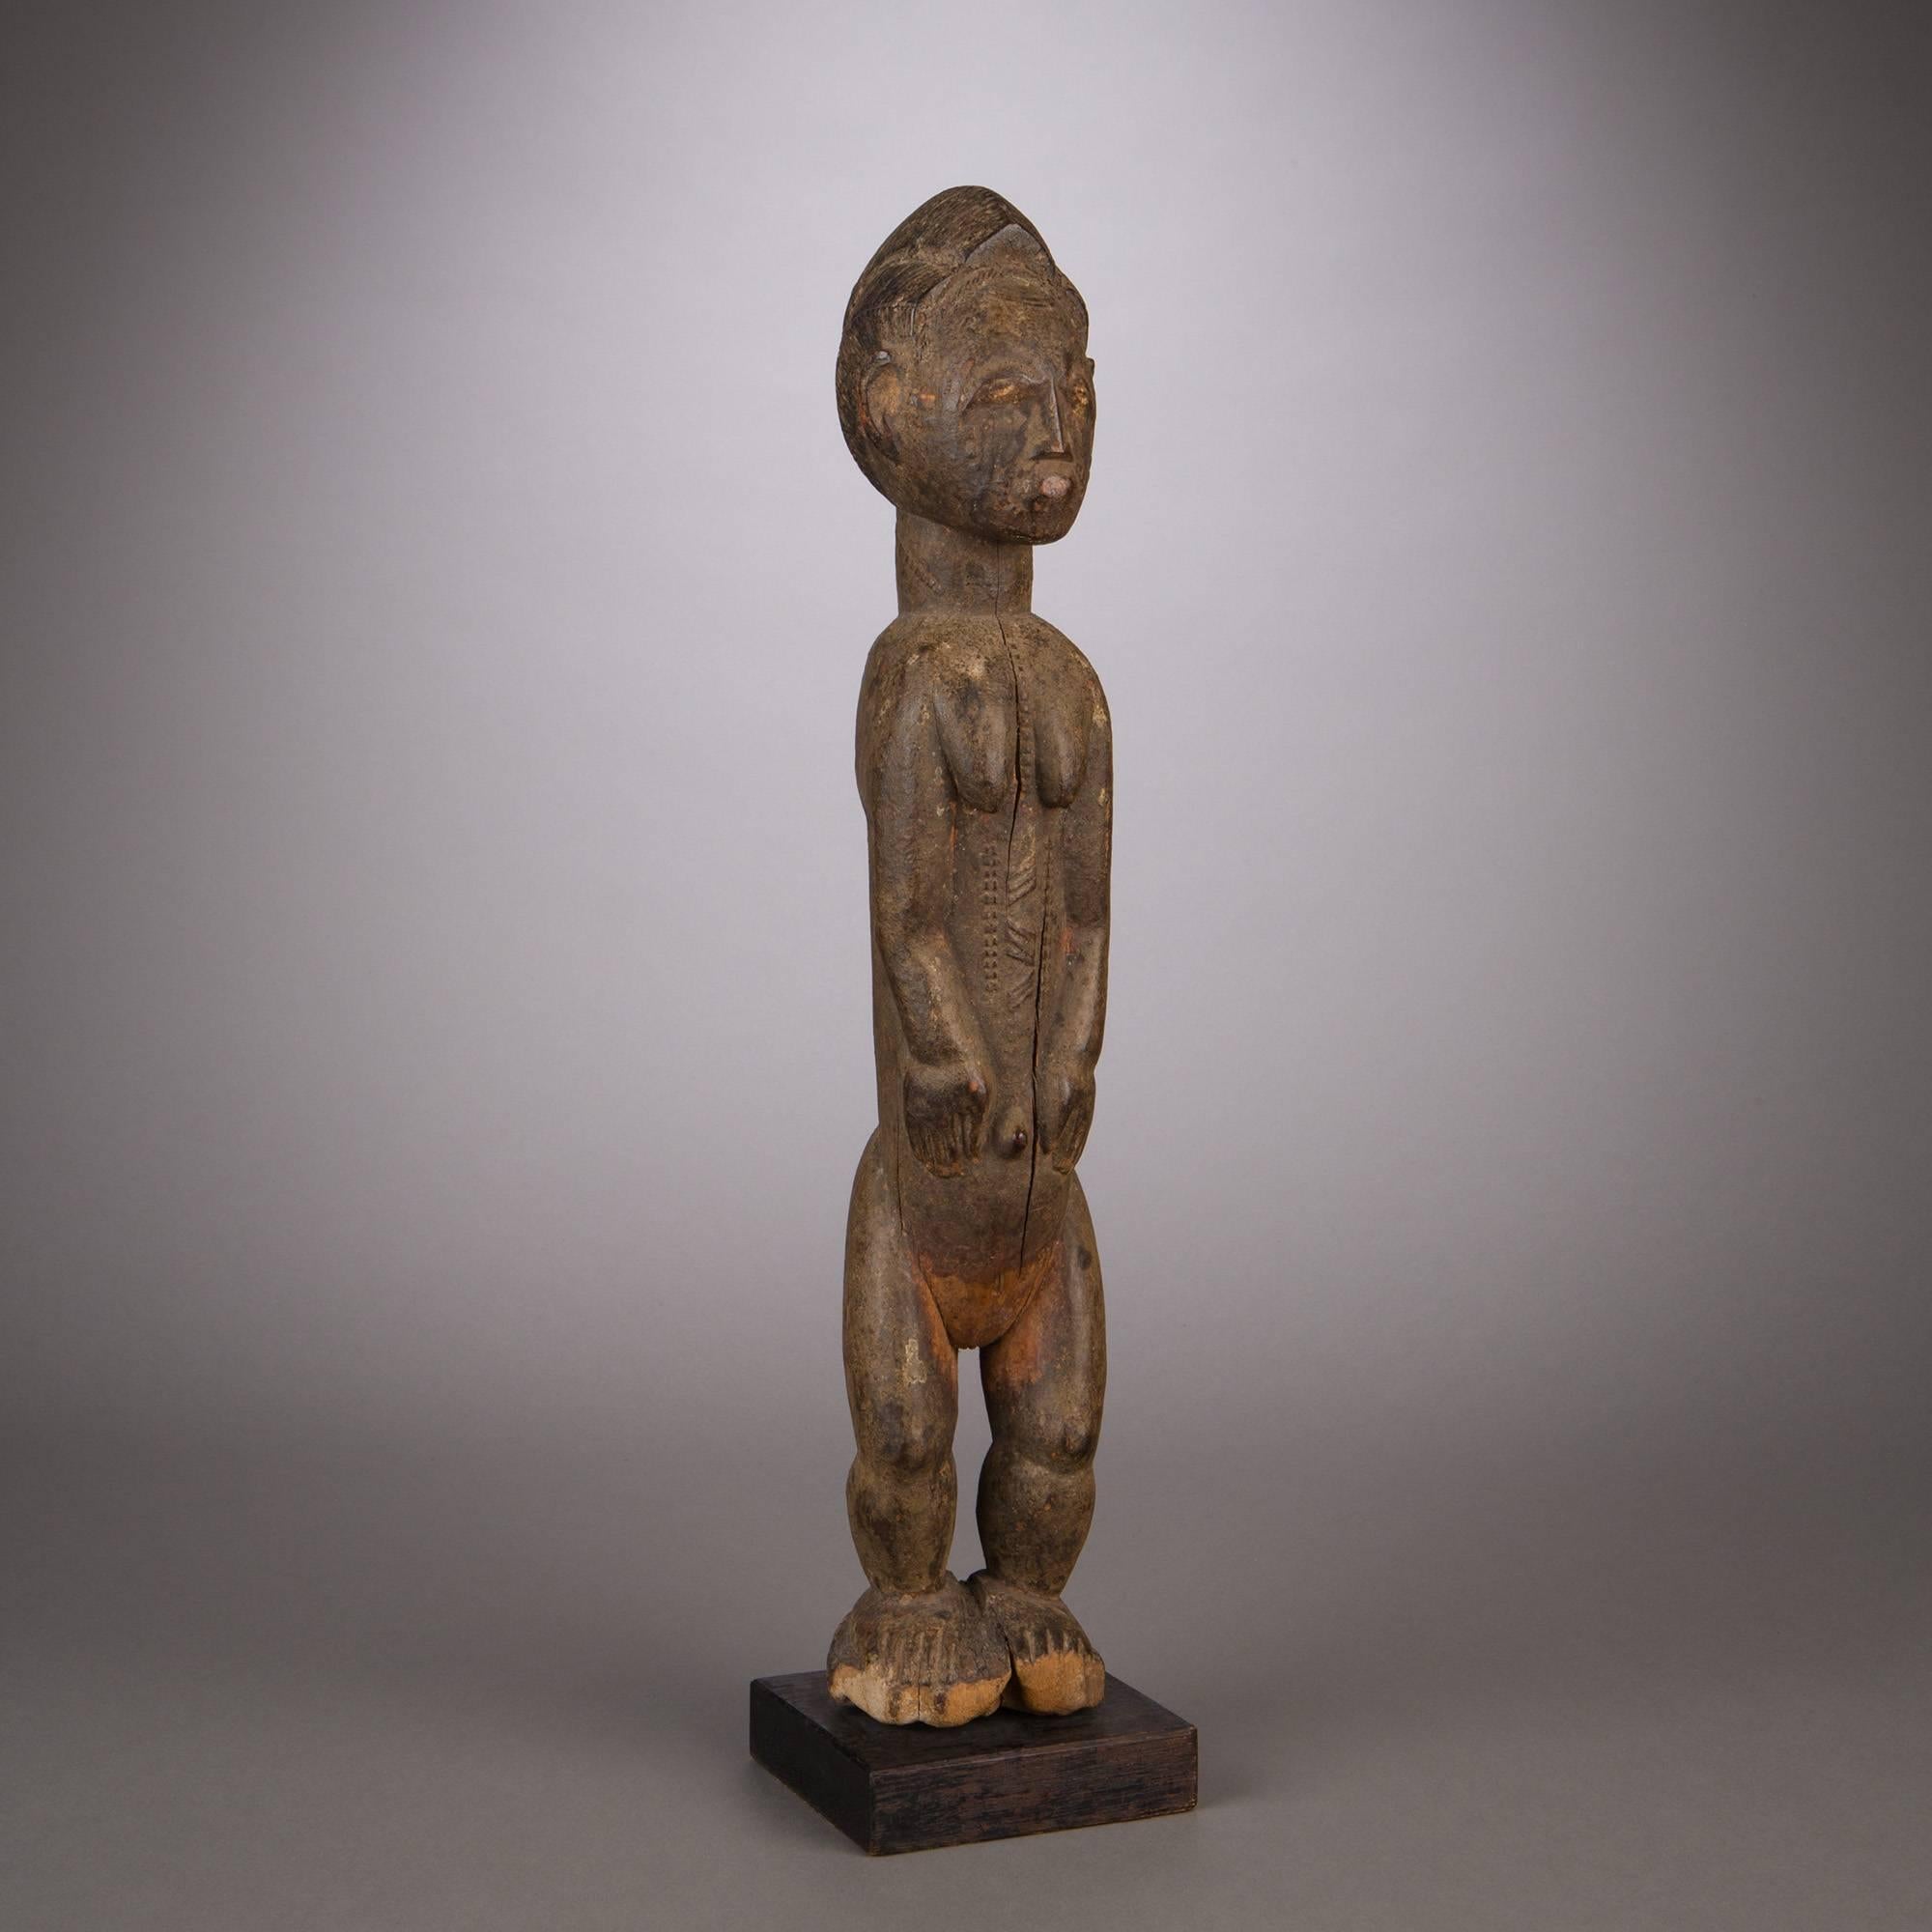 Divinatory figures among the Baule were used as dwellings of asye usu, or bush spirits, incorporeal consciousness’s from outside the village bounds brought into communication with the diviner. Such figures were designed as ideal male or female